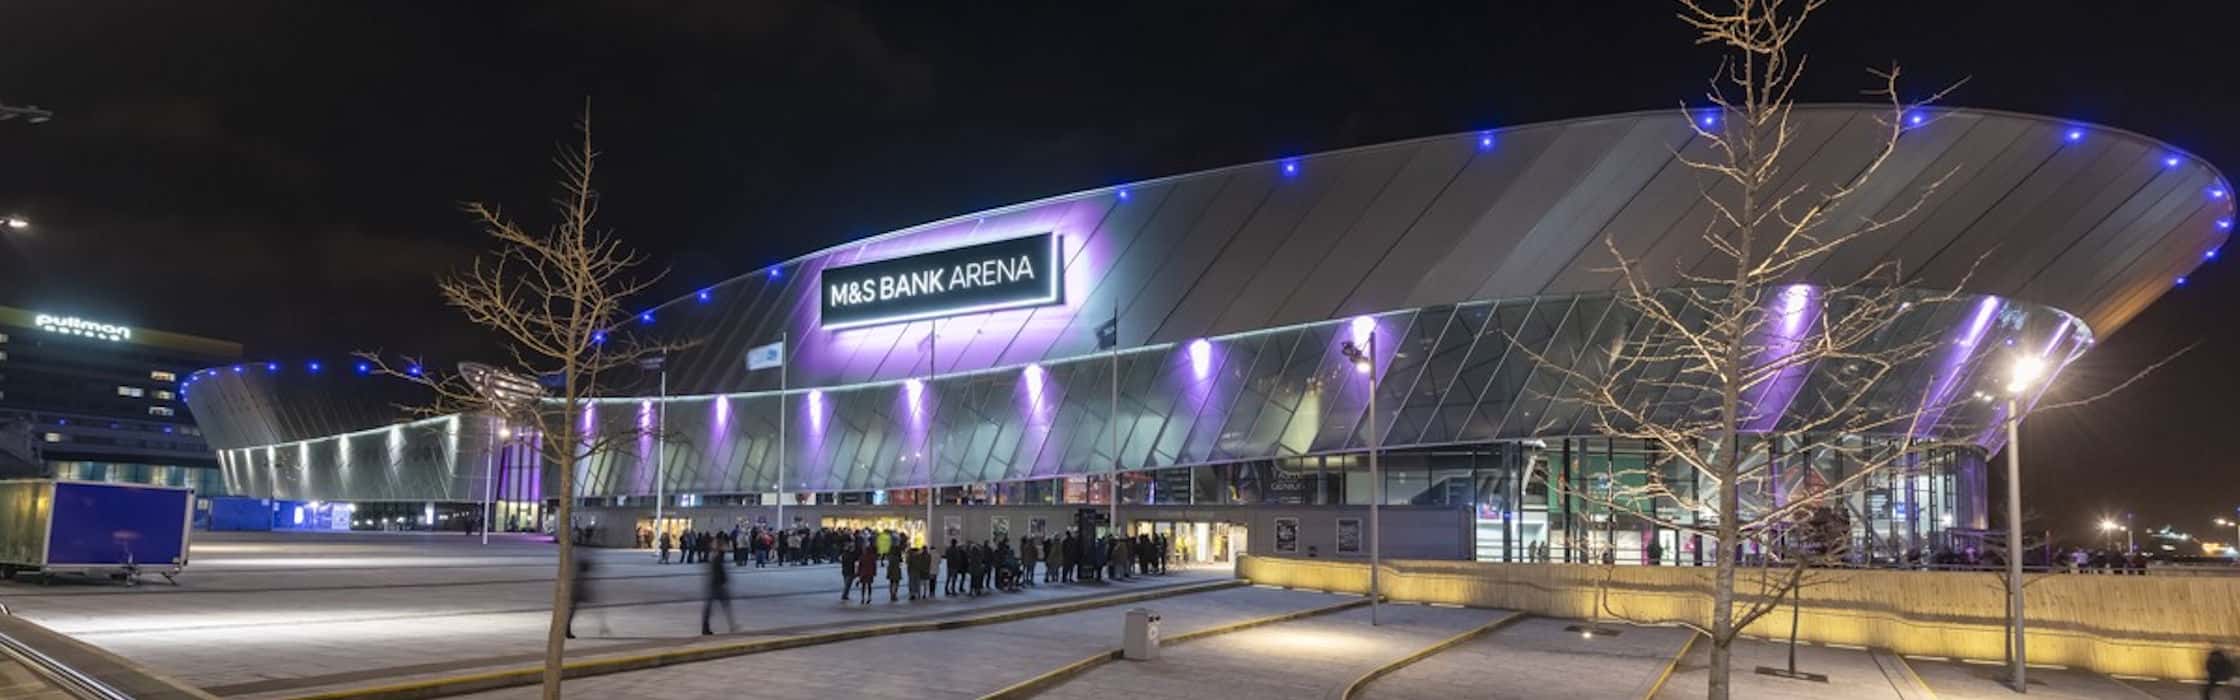 What's On at the M&S Bank Arena, Liverpool